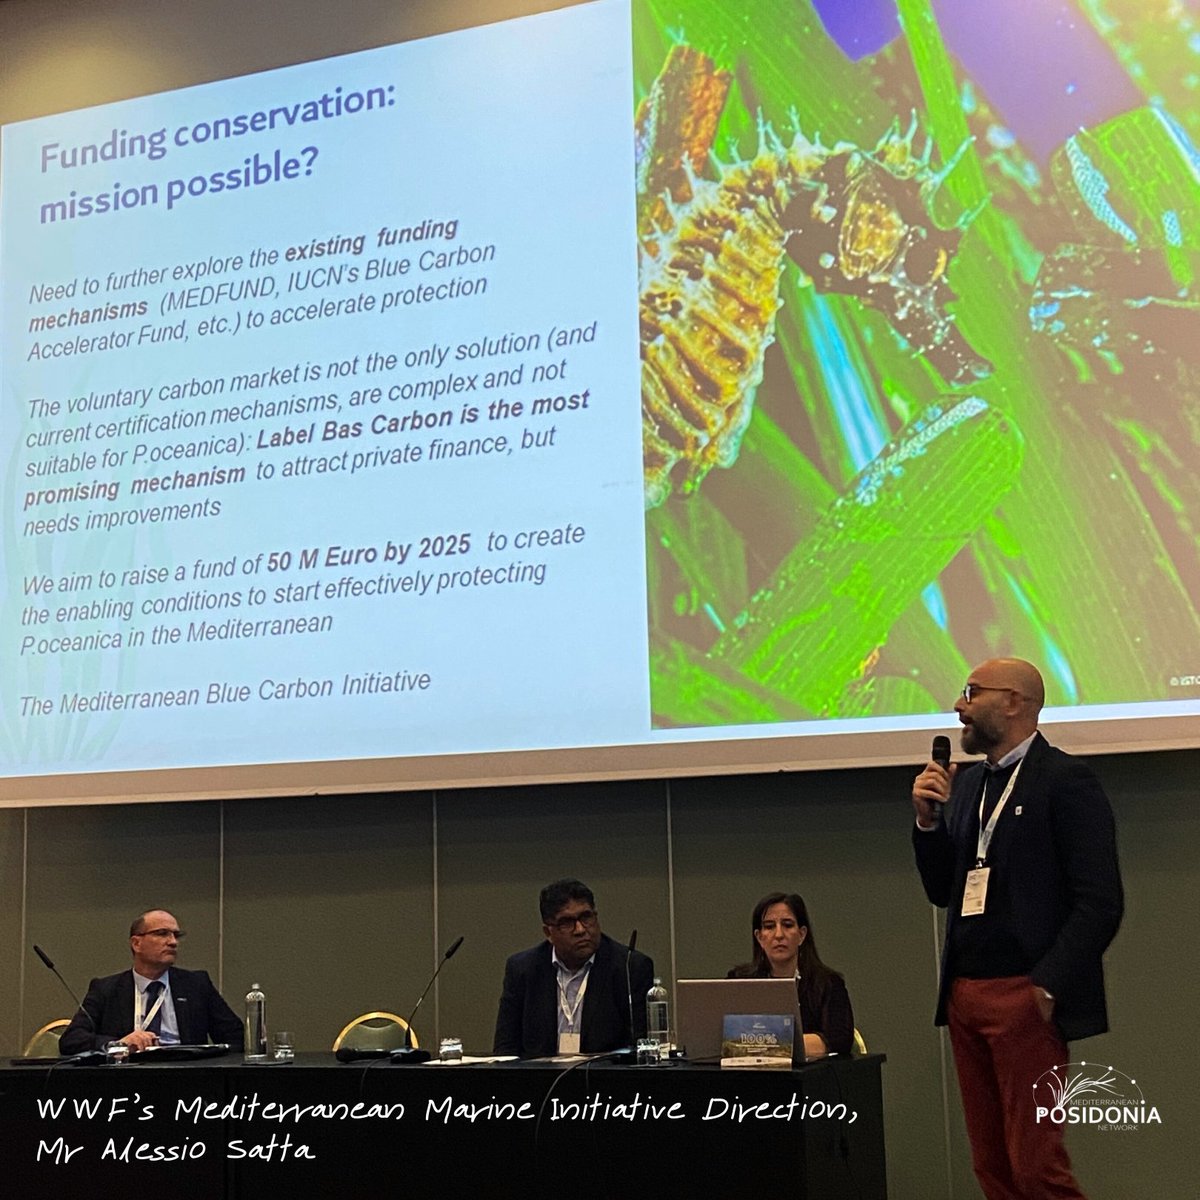 🌱️Yesterday was the launching of an innovative initiative at #COP23Med #BarcelonaConvention, with the goal of safeguarding #Posidonia in the Mediterranean! Special thank to the @WWF  Mediterranean, who presented the main findings about #bluecarbon financing mechanism.